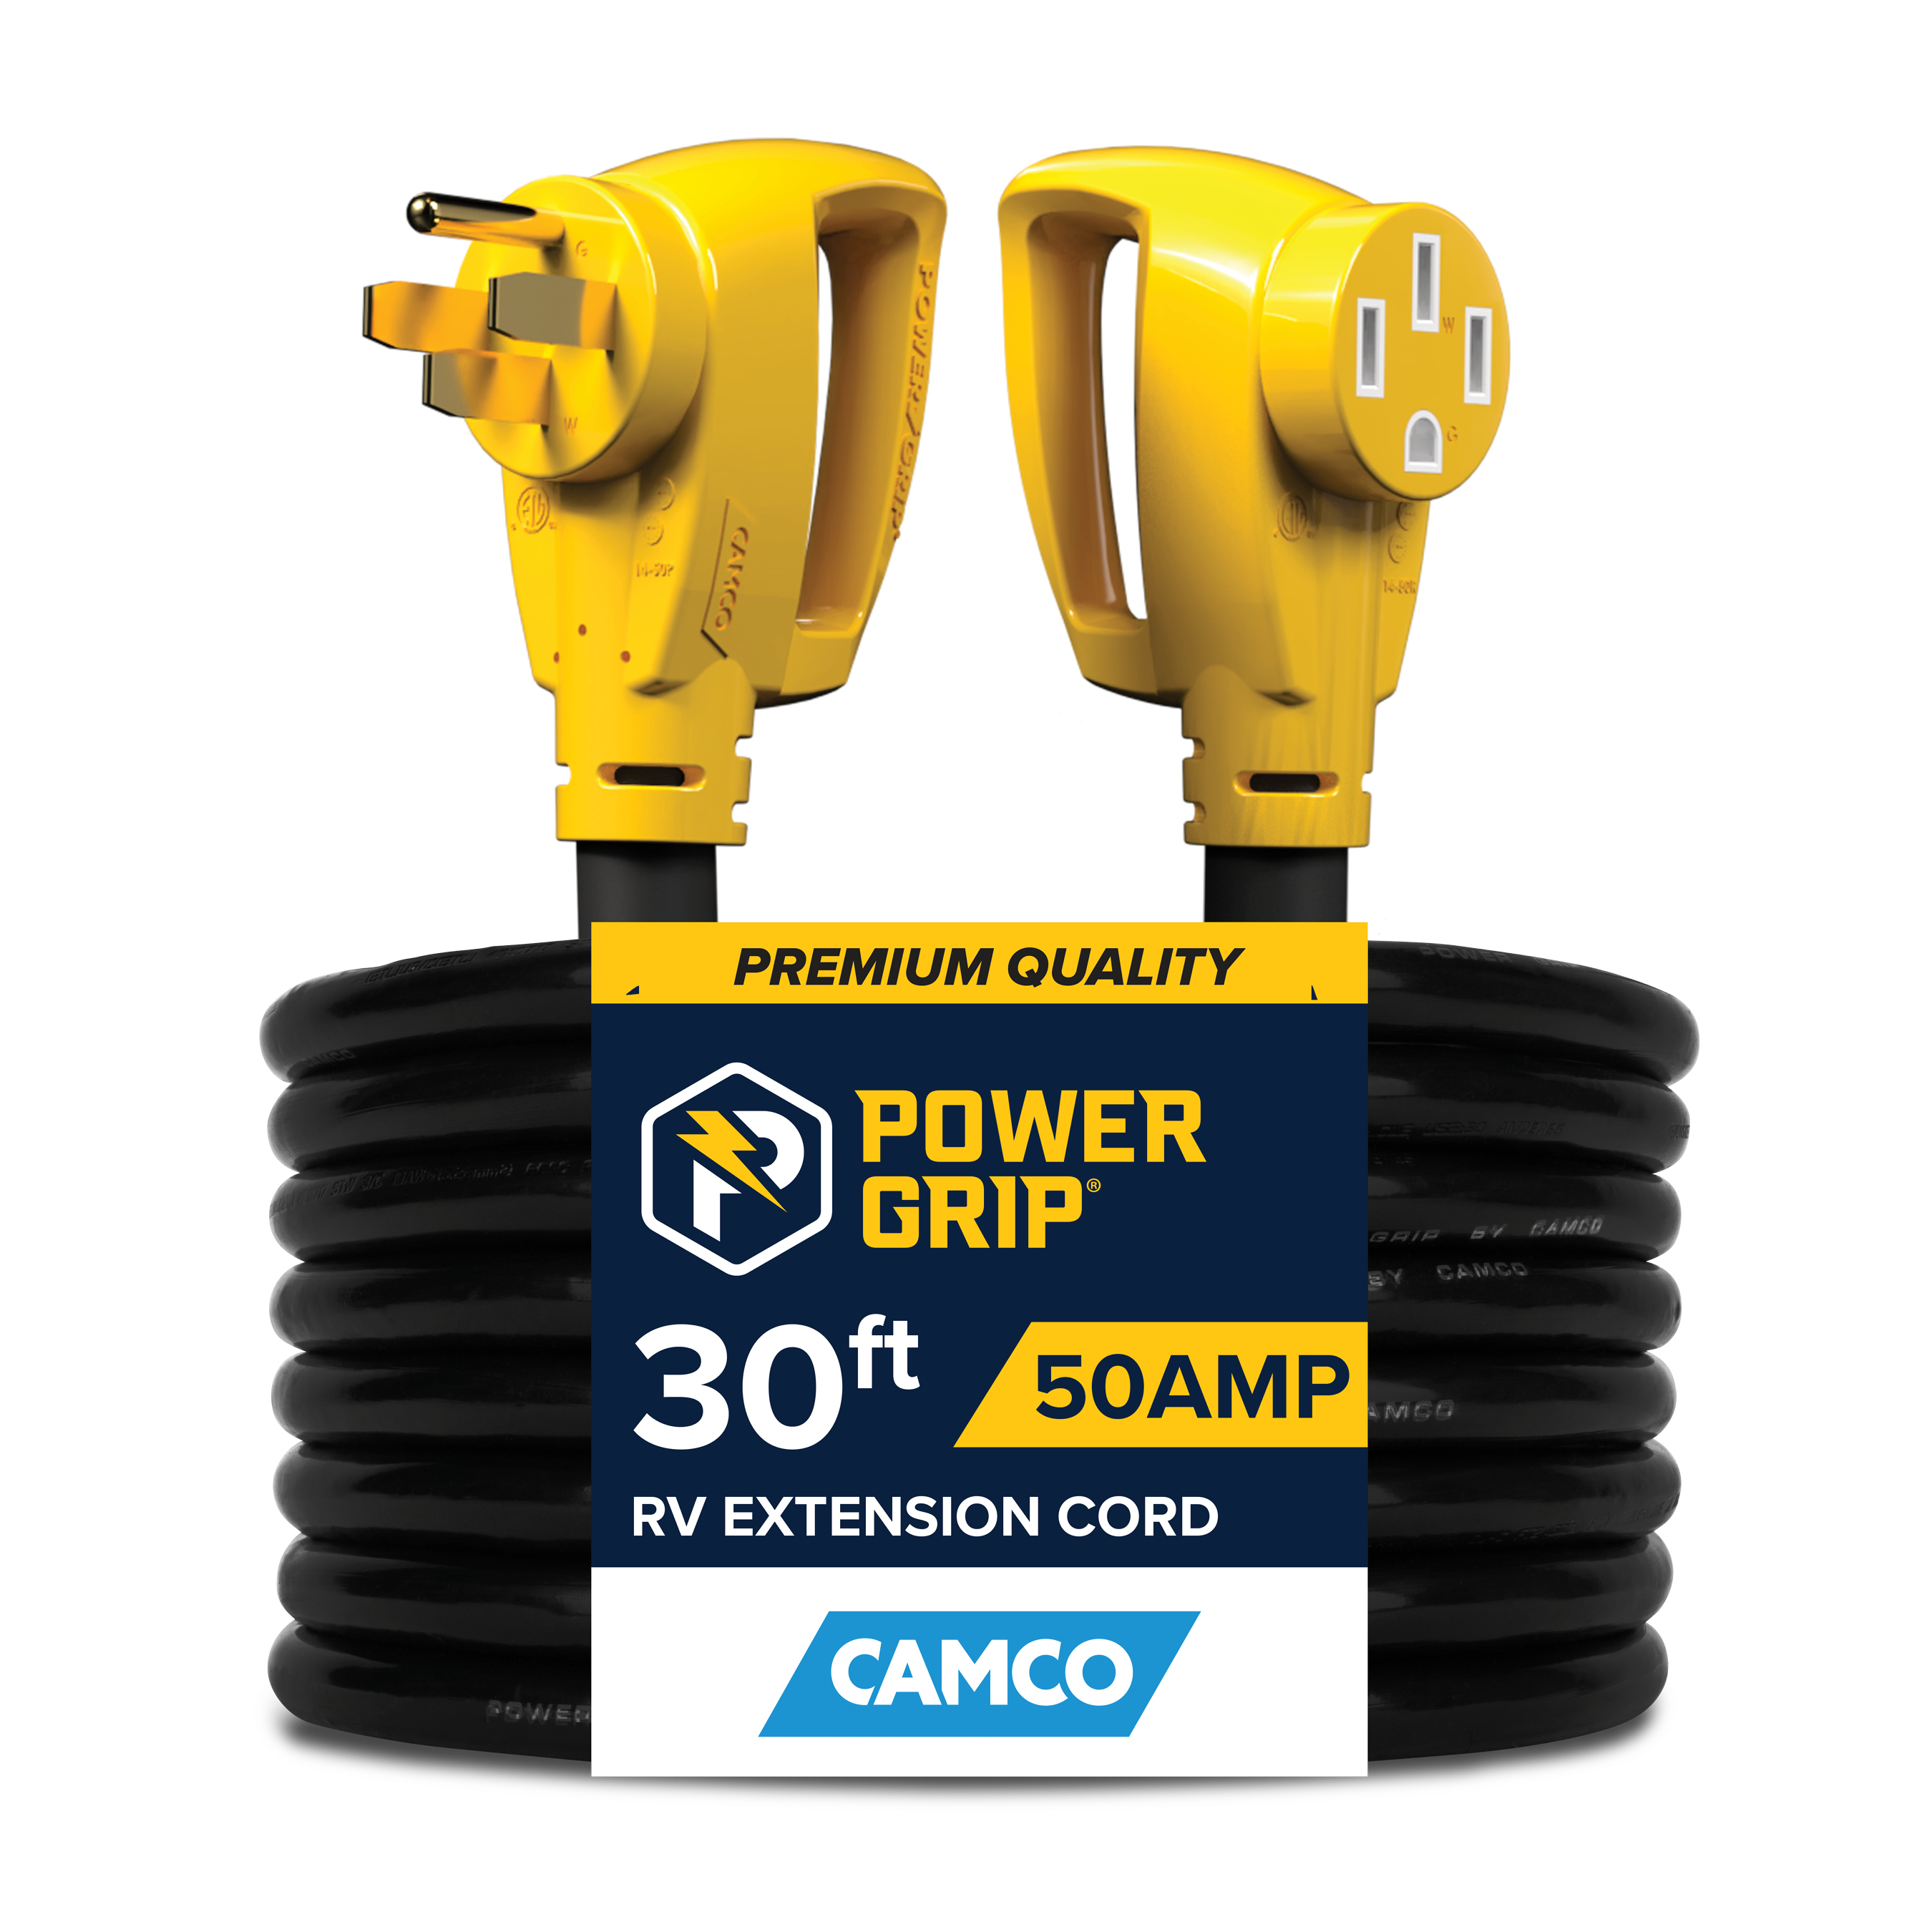 Camco PowerGrip Camper/RV 30-Foot Extension Cord | 50-Amp | Rated for 125/250 Volts/12500 Watts (55195) - image 1 of 6